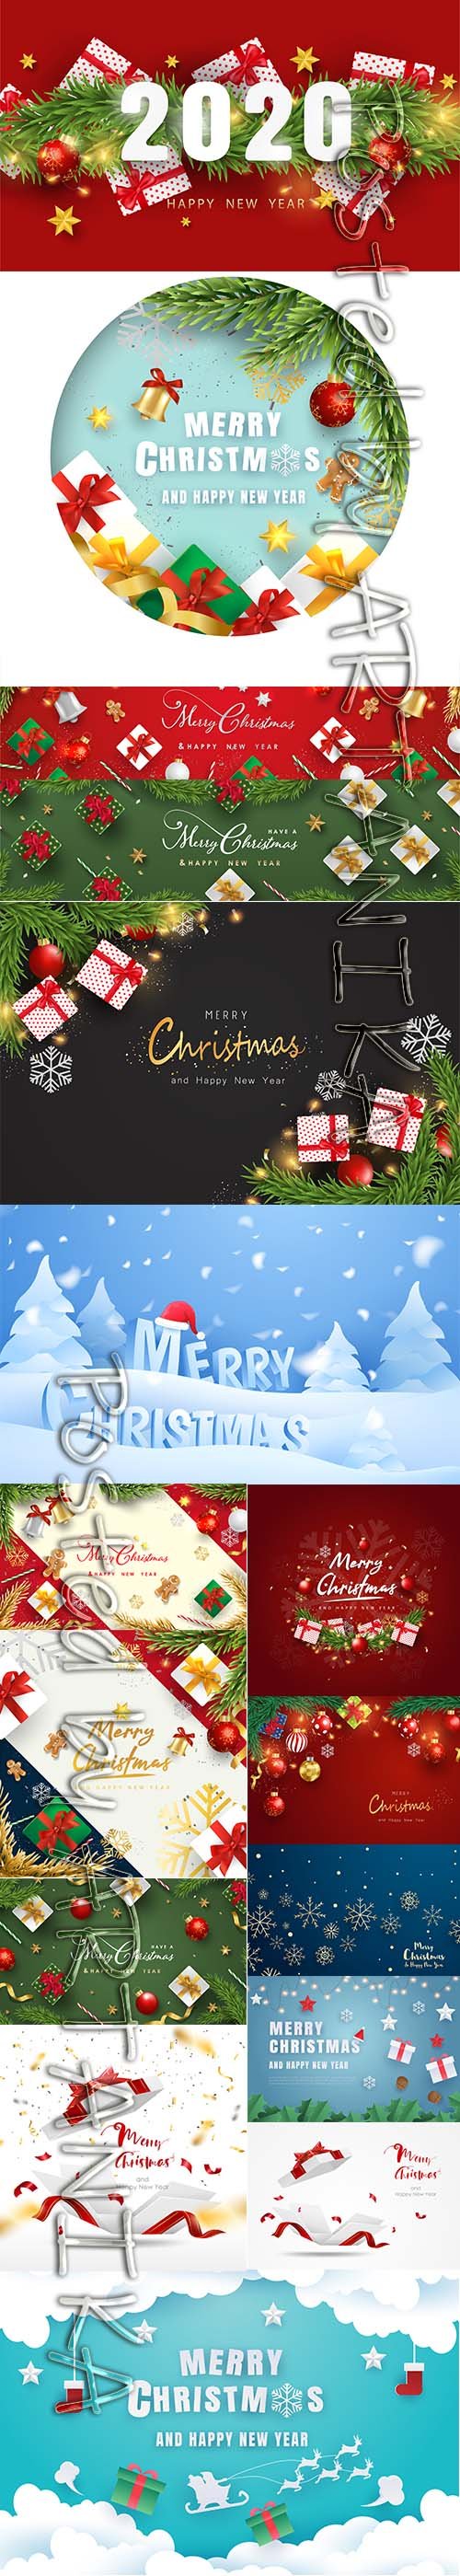 Merry Christmas and New Year 2020 Vector Illustrations Pack Vol 19